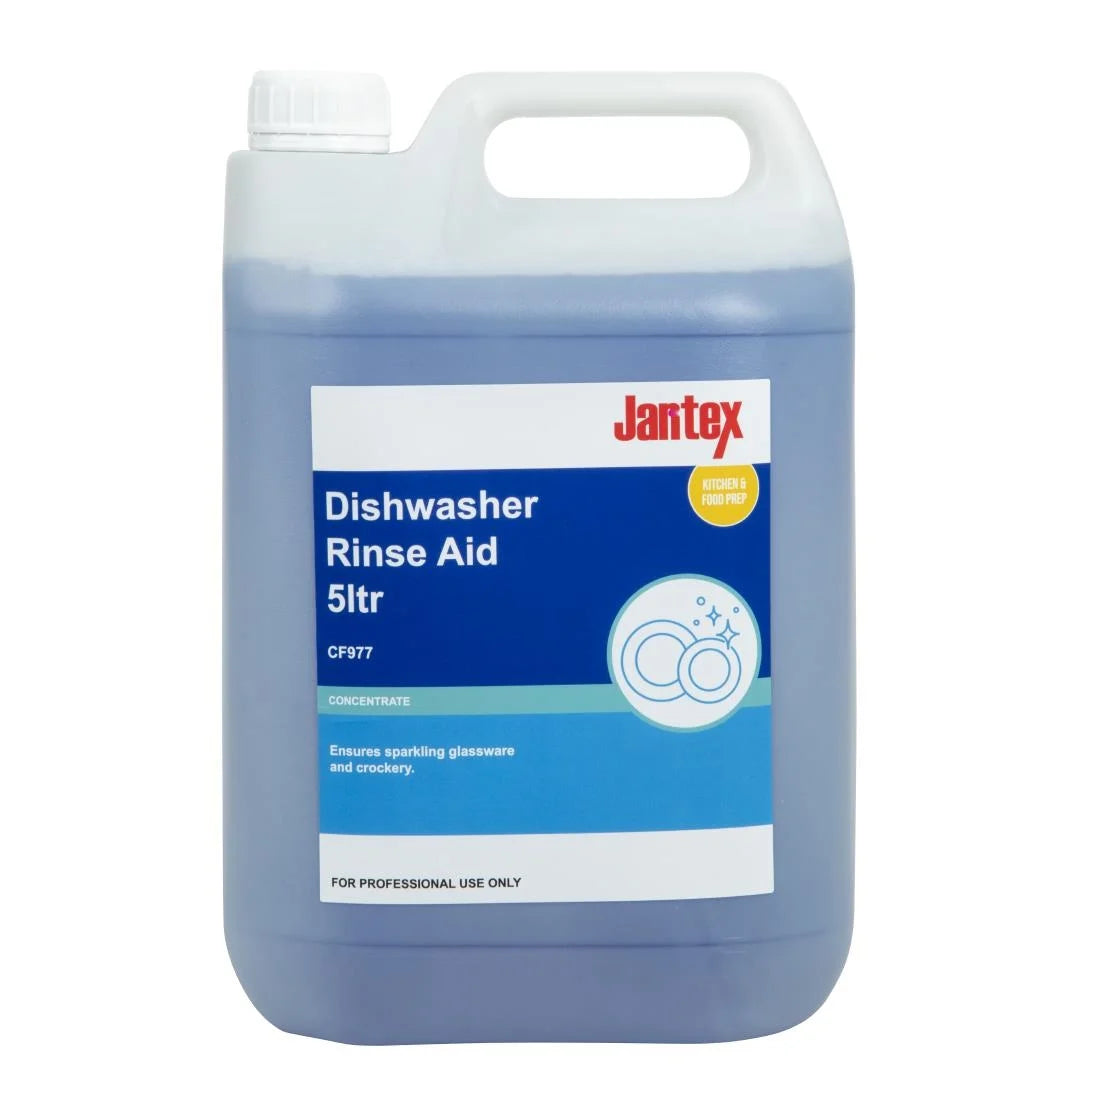 Jantex Dishwasher Rinse Aid Concentrate 5Ltr JD Catering Equipment Solutions Ltd